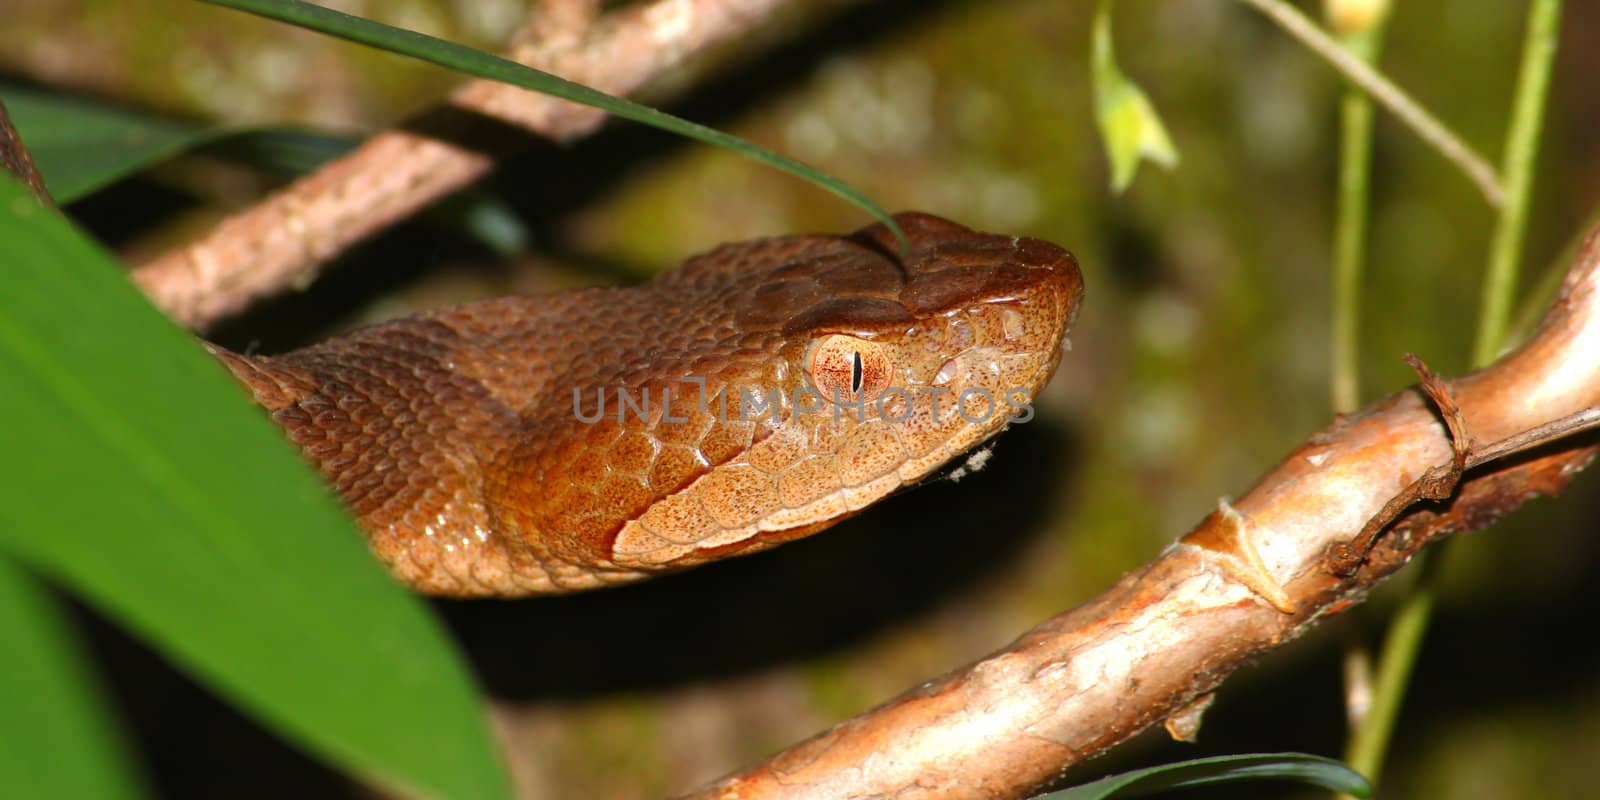 Copperhead (Agkistrodon contortrix) snake in the southern United States.